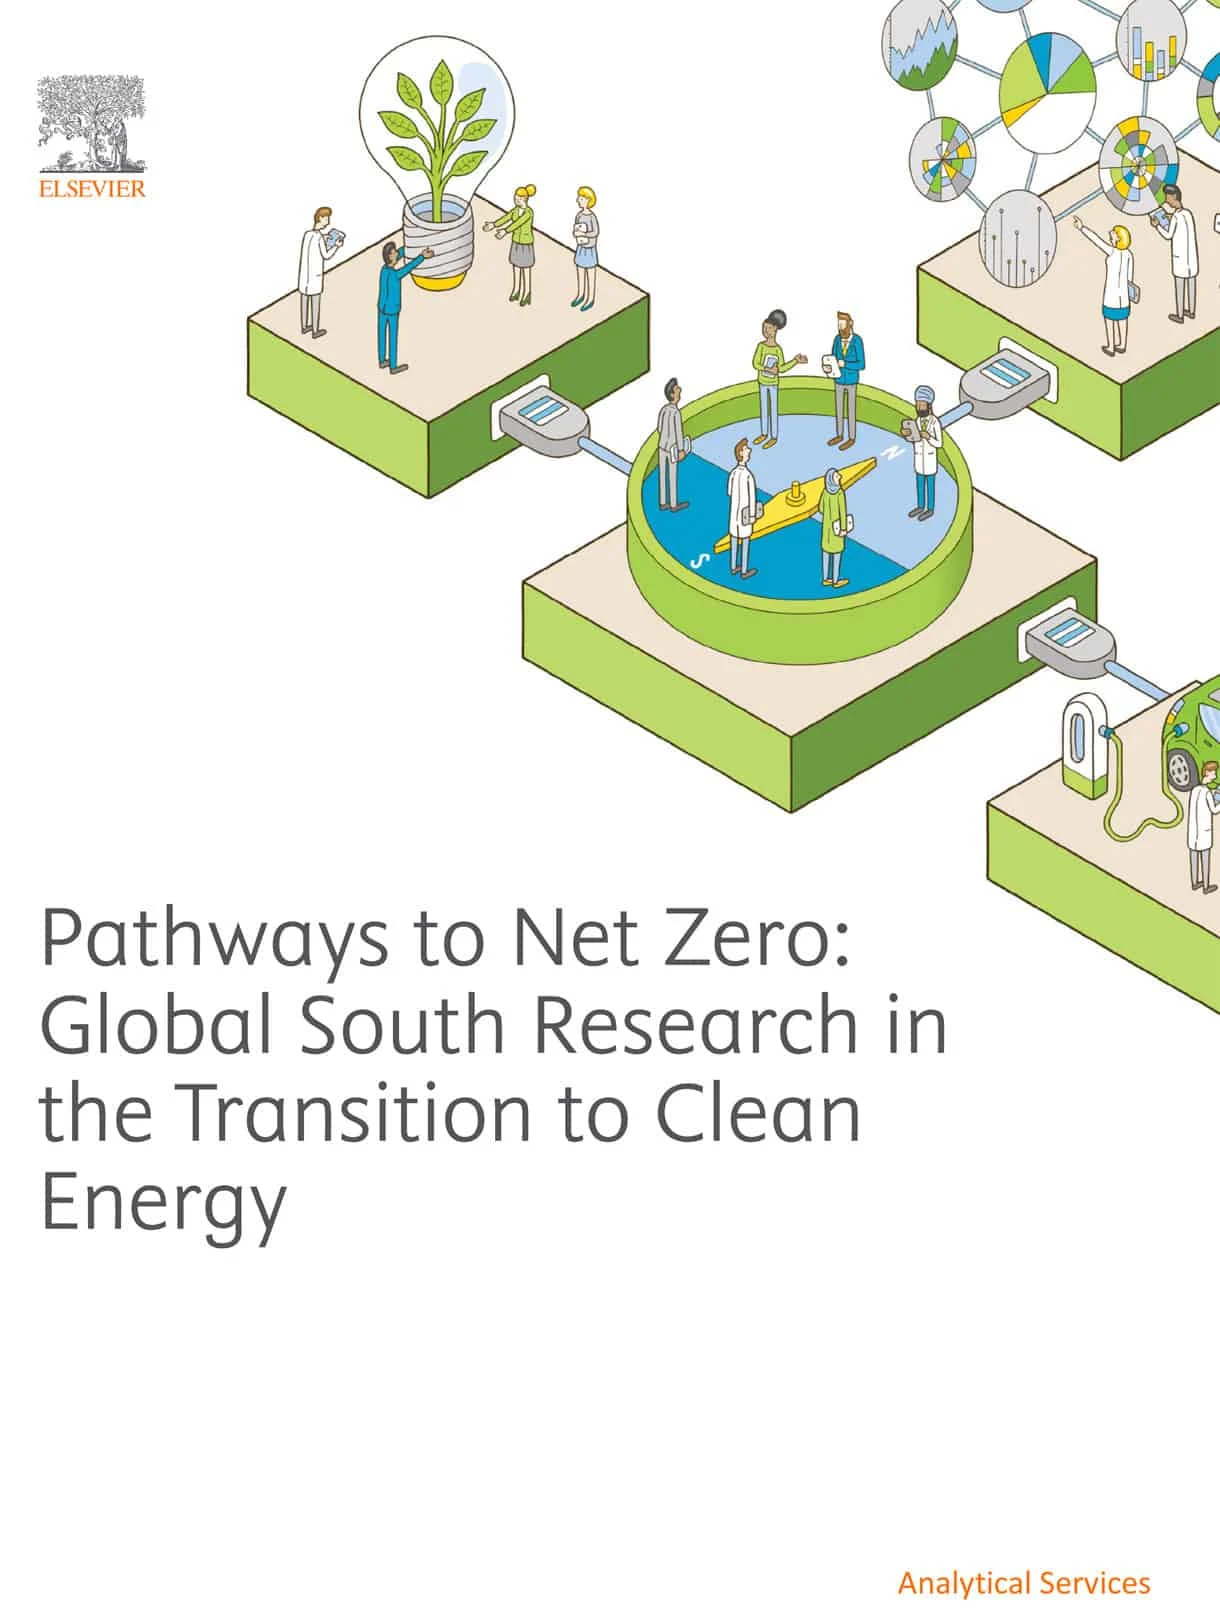 Cover  of the report "Pathways to Net Zero: Global South Research in the Transition to Clean Energy"